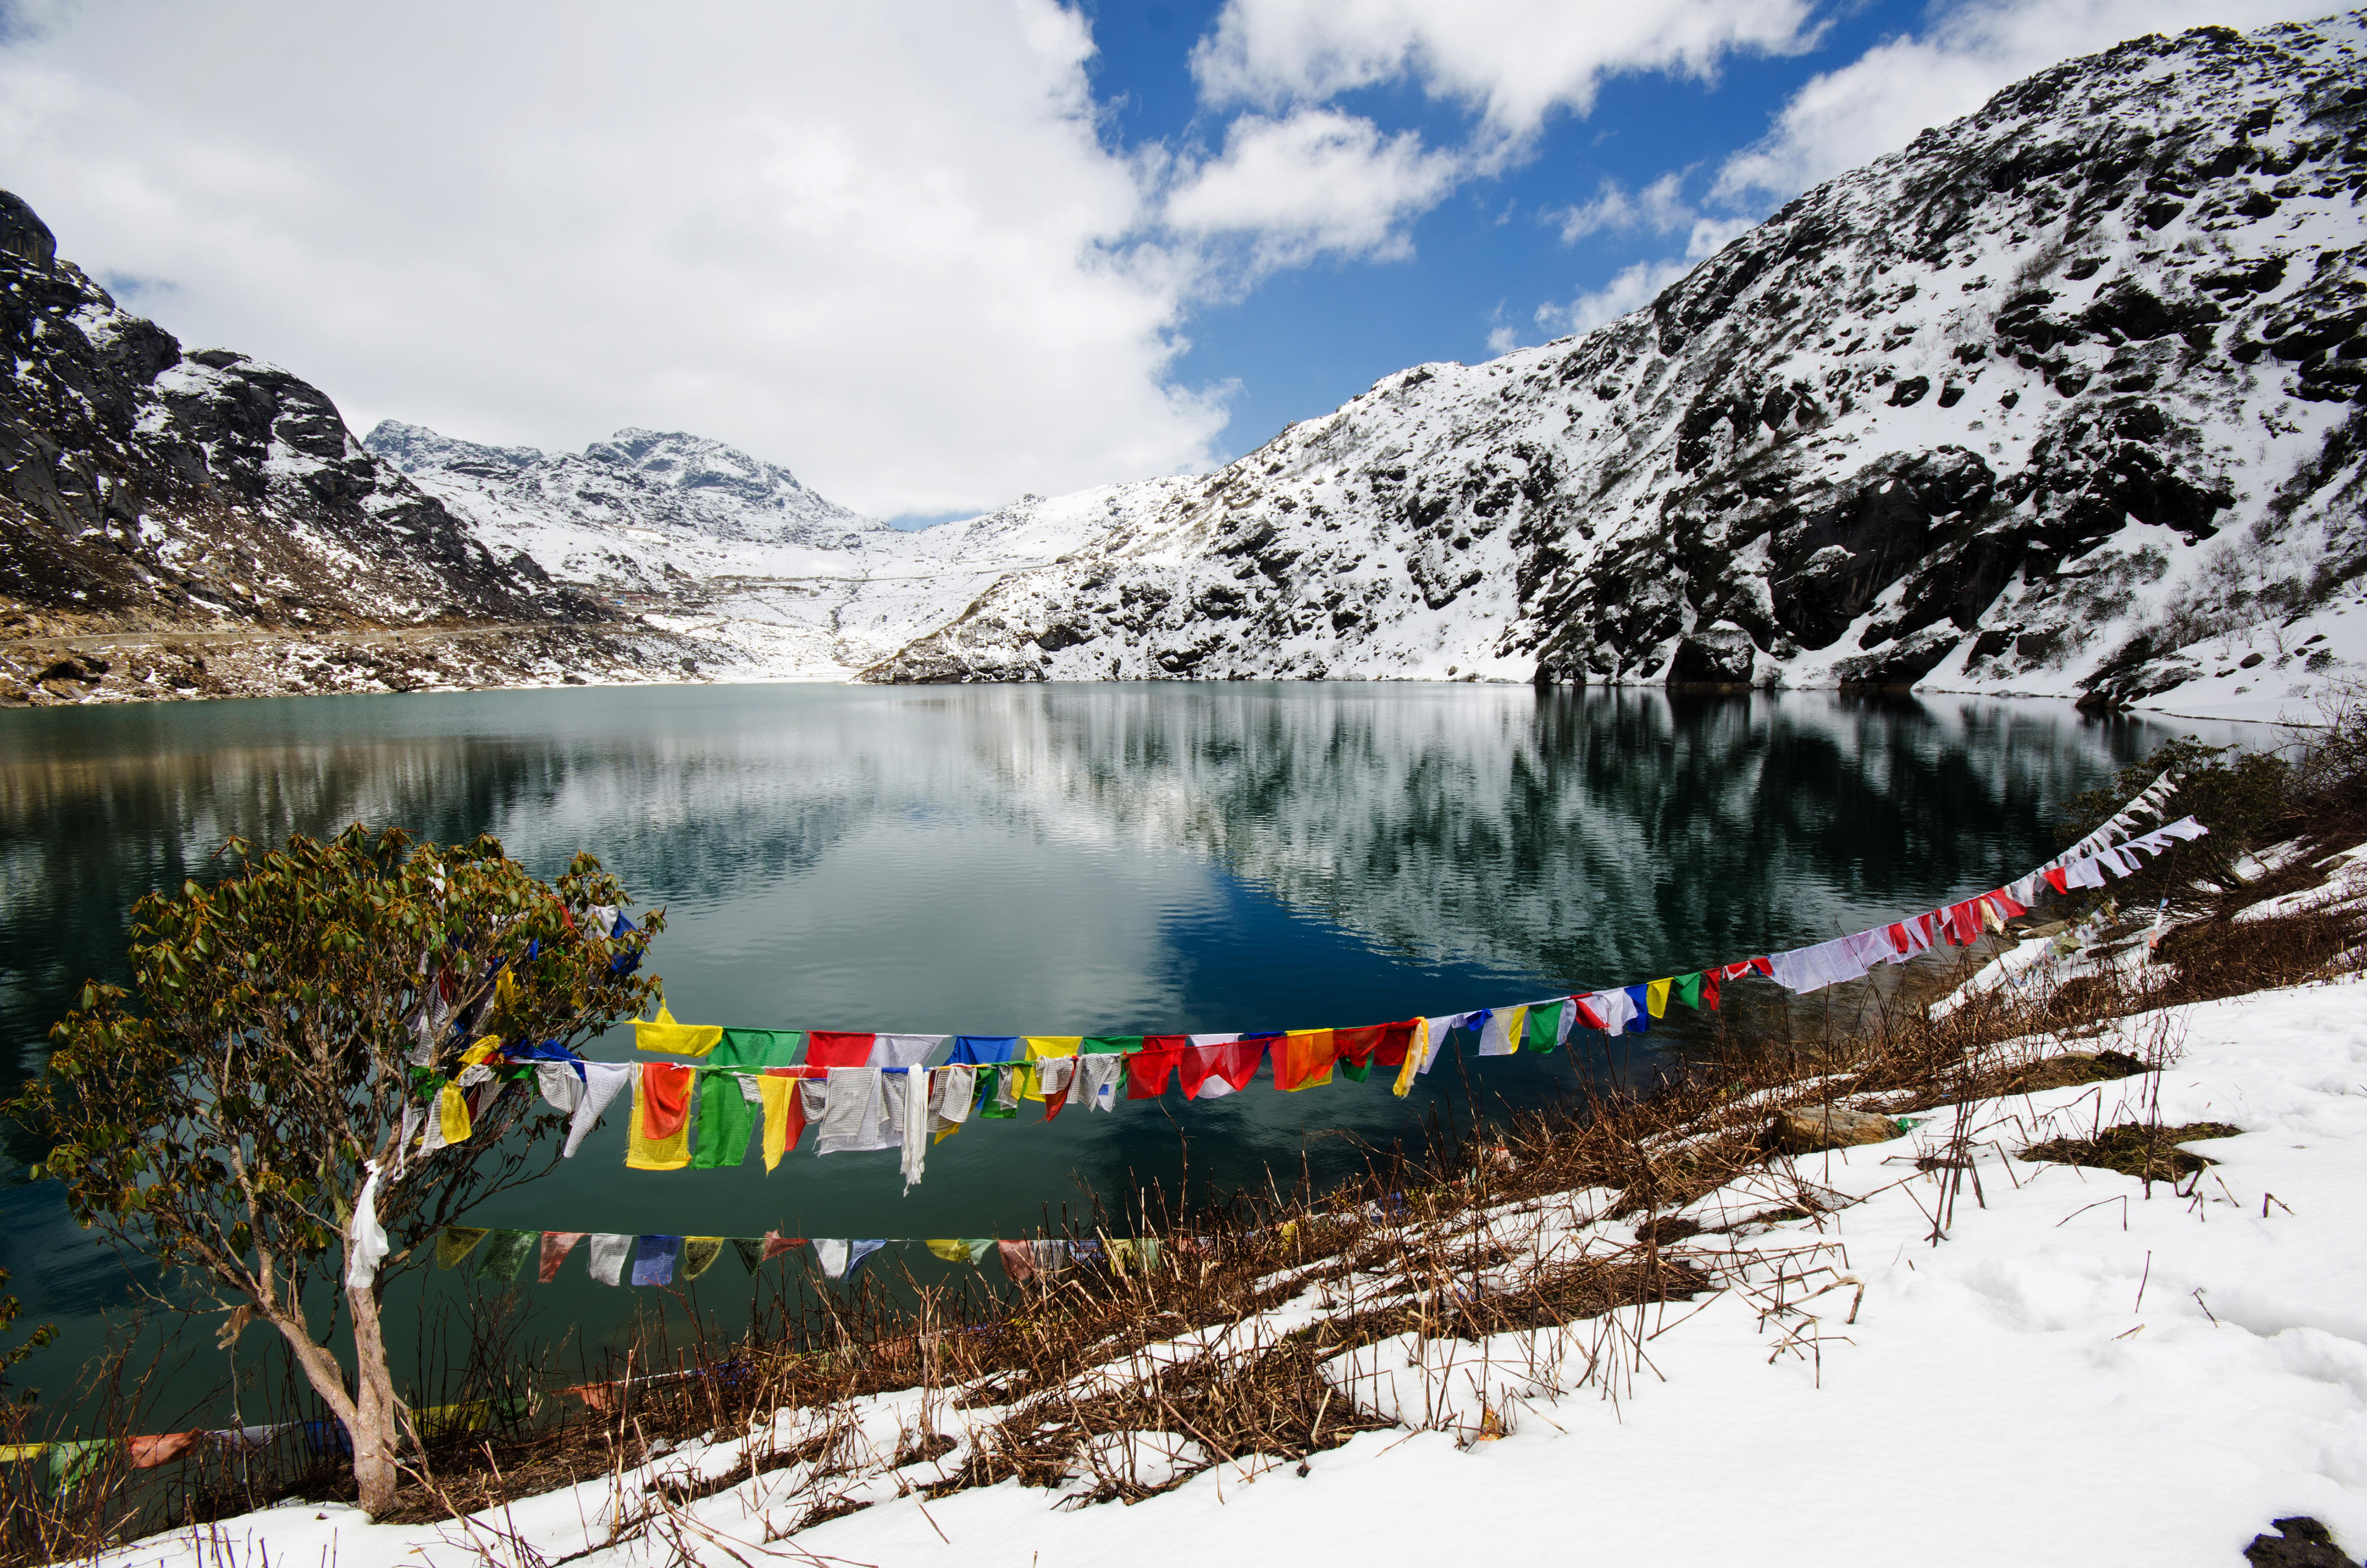 Things to Do in Gangtok